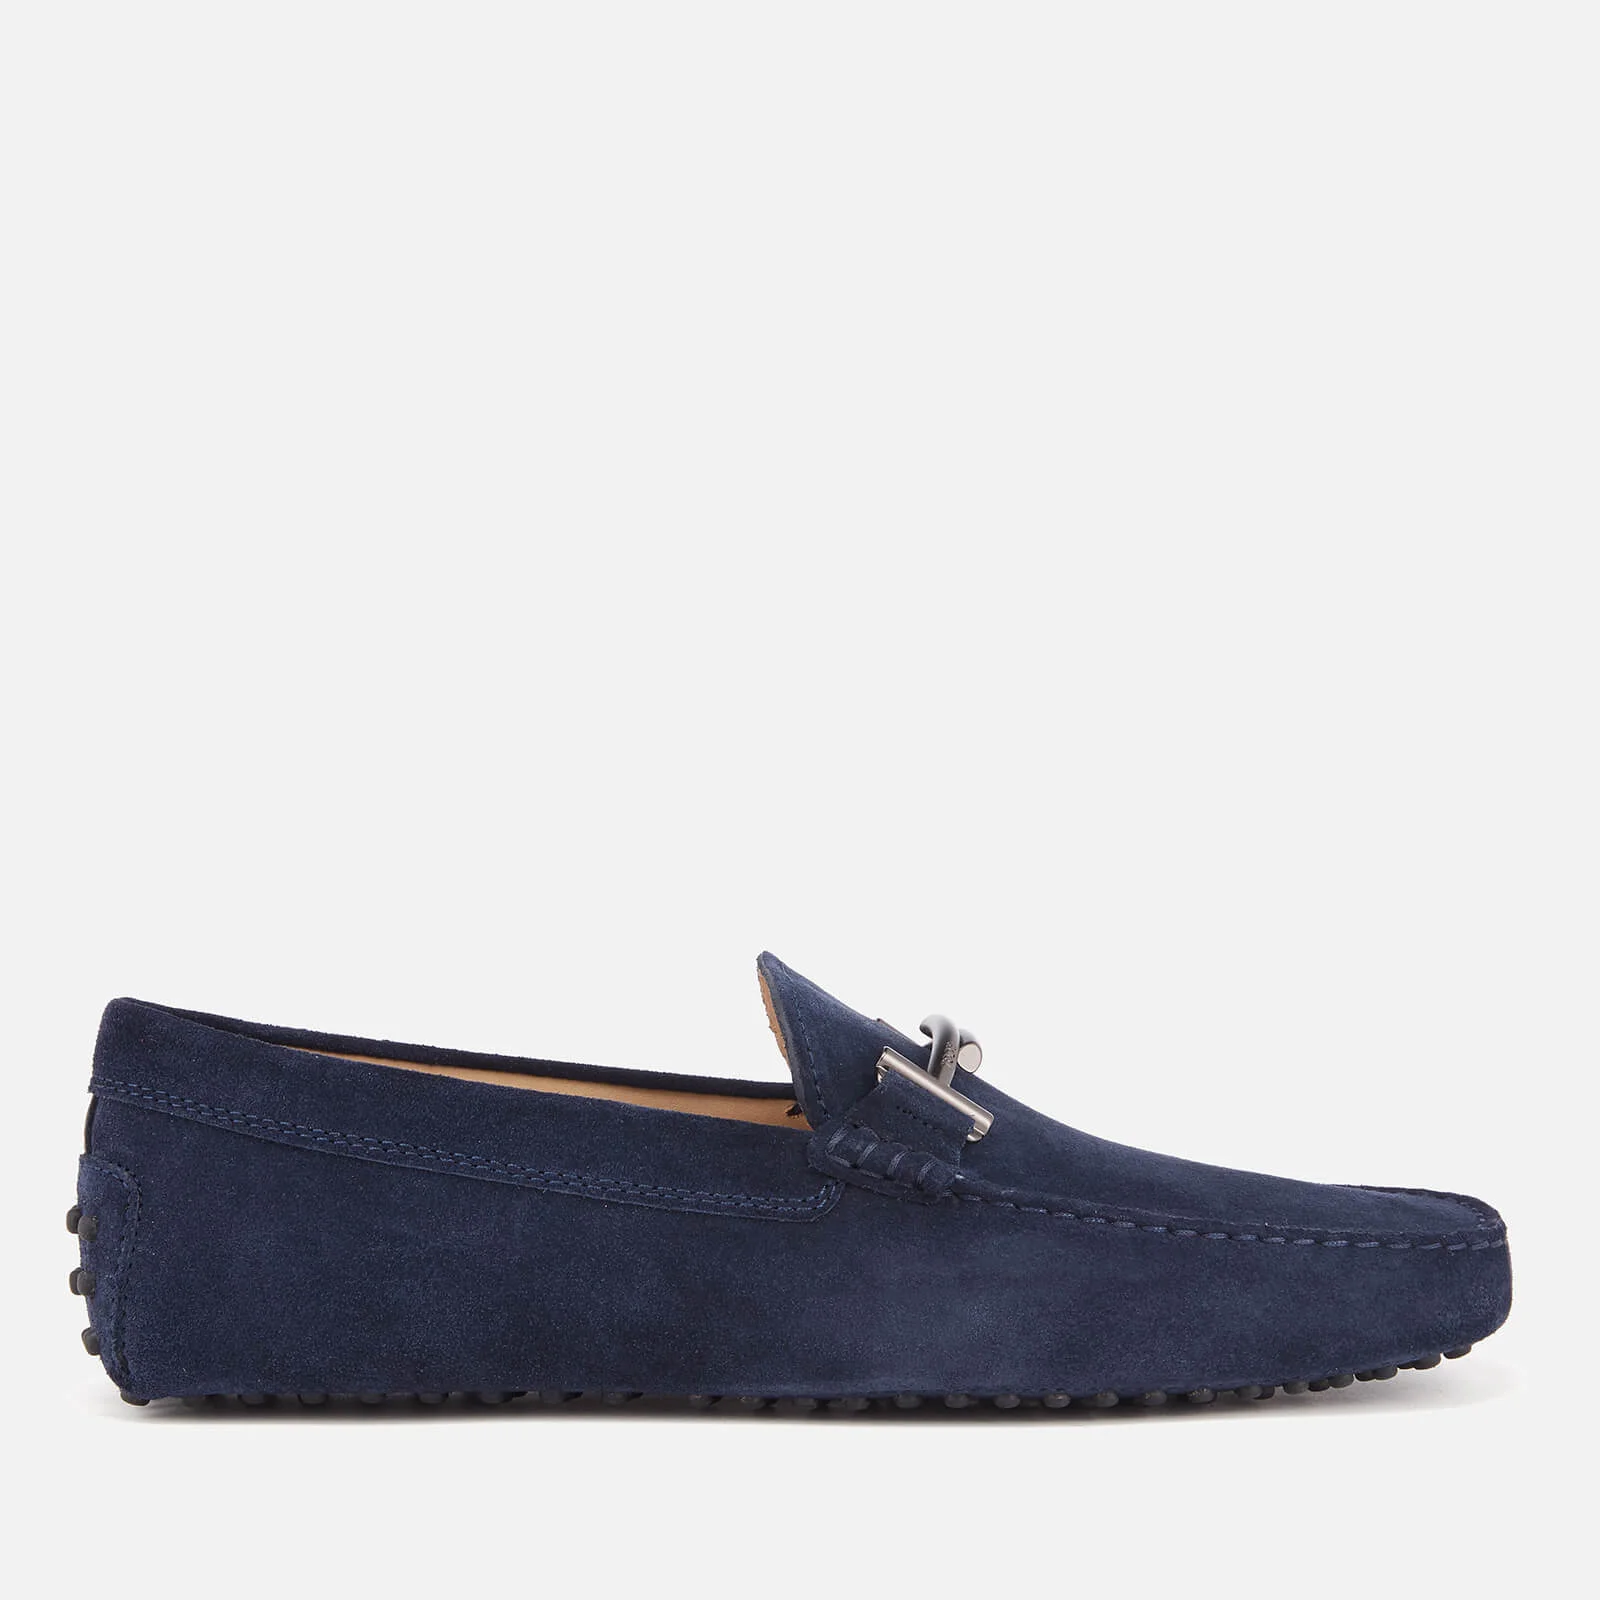 Tod's Men's Suede Gommino Double T Driving Shoes - Navy Image 1